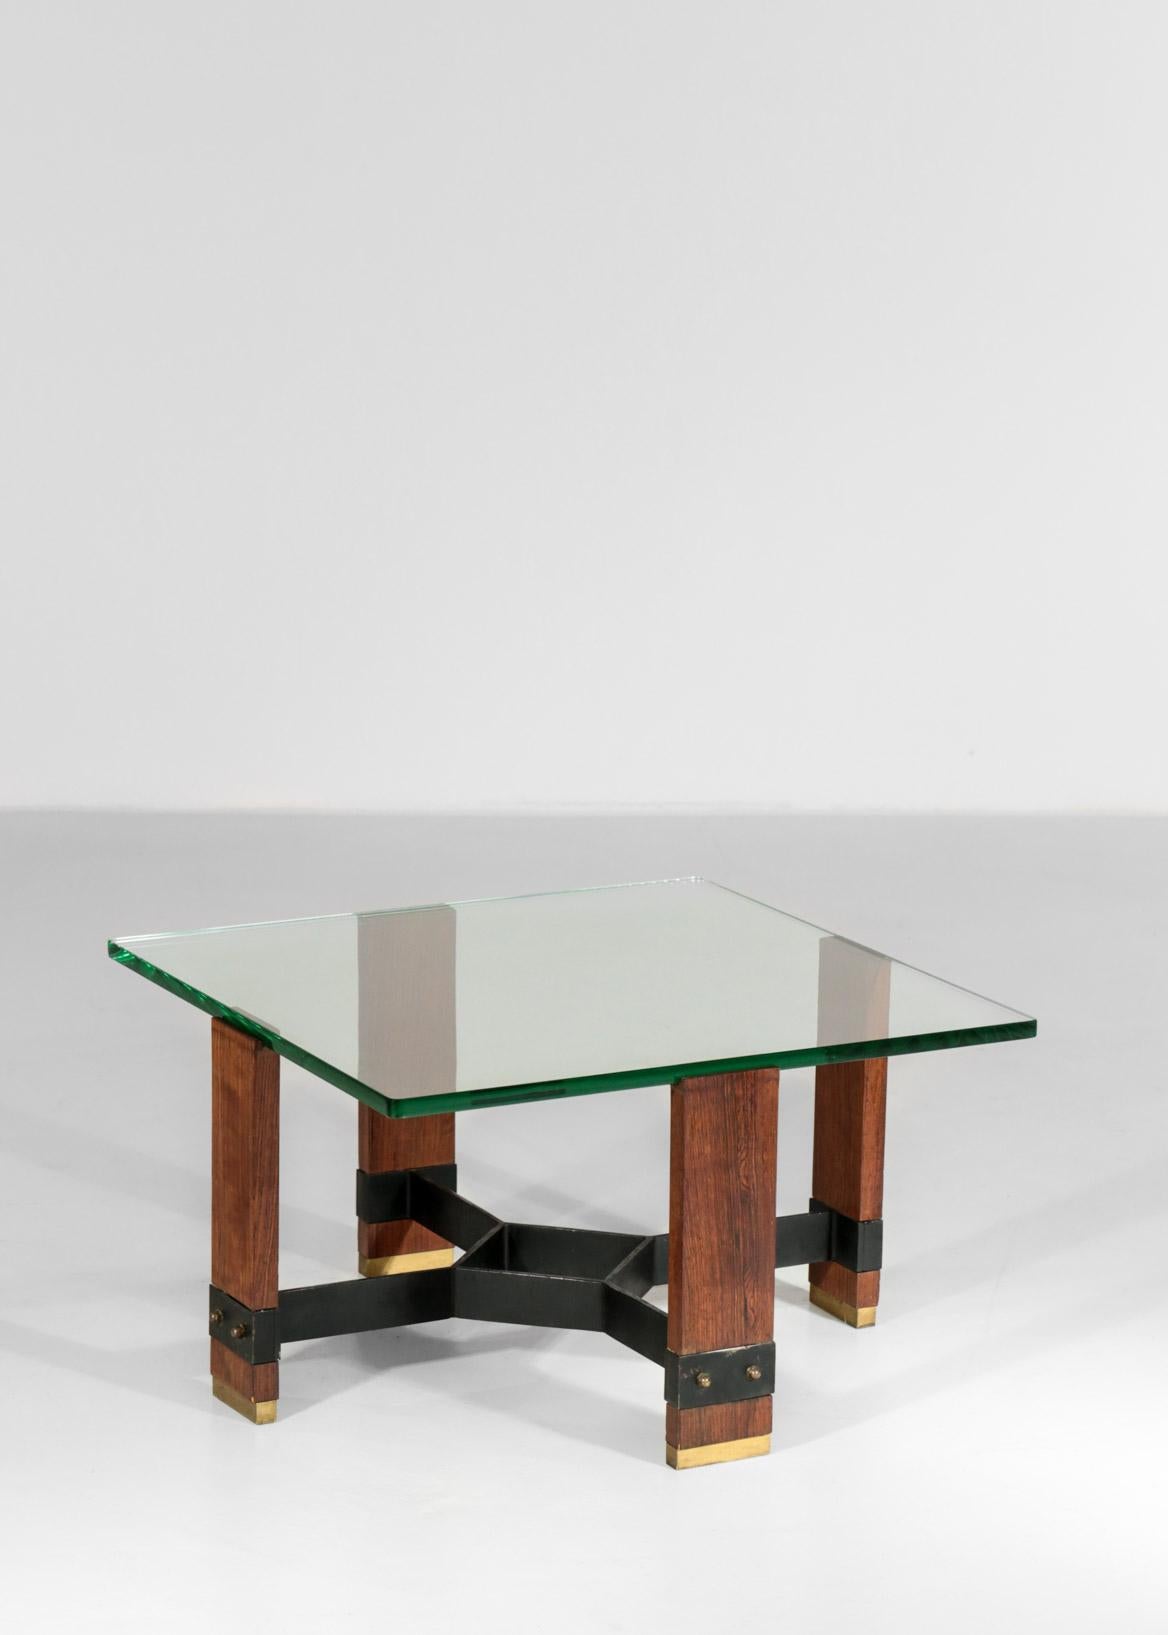 Italian coffee table made of wood, brass and metal for the structure and a thick top in glass.